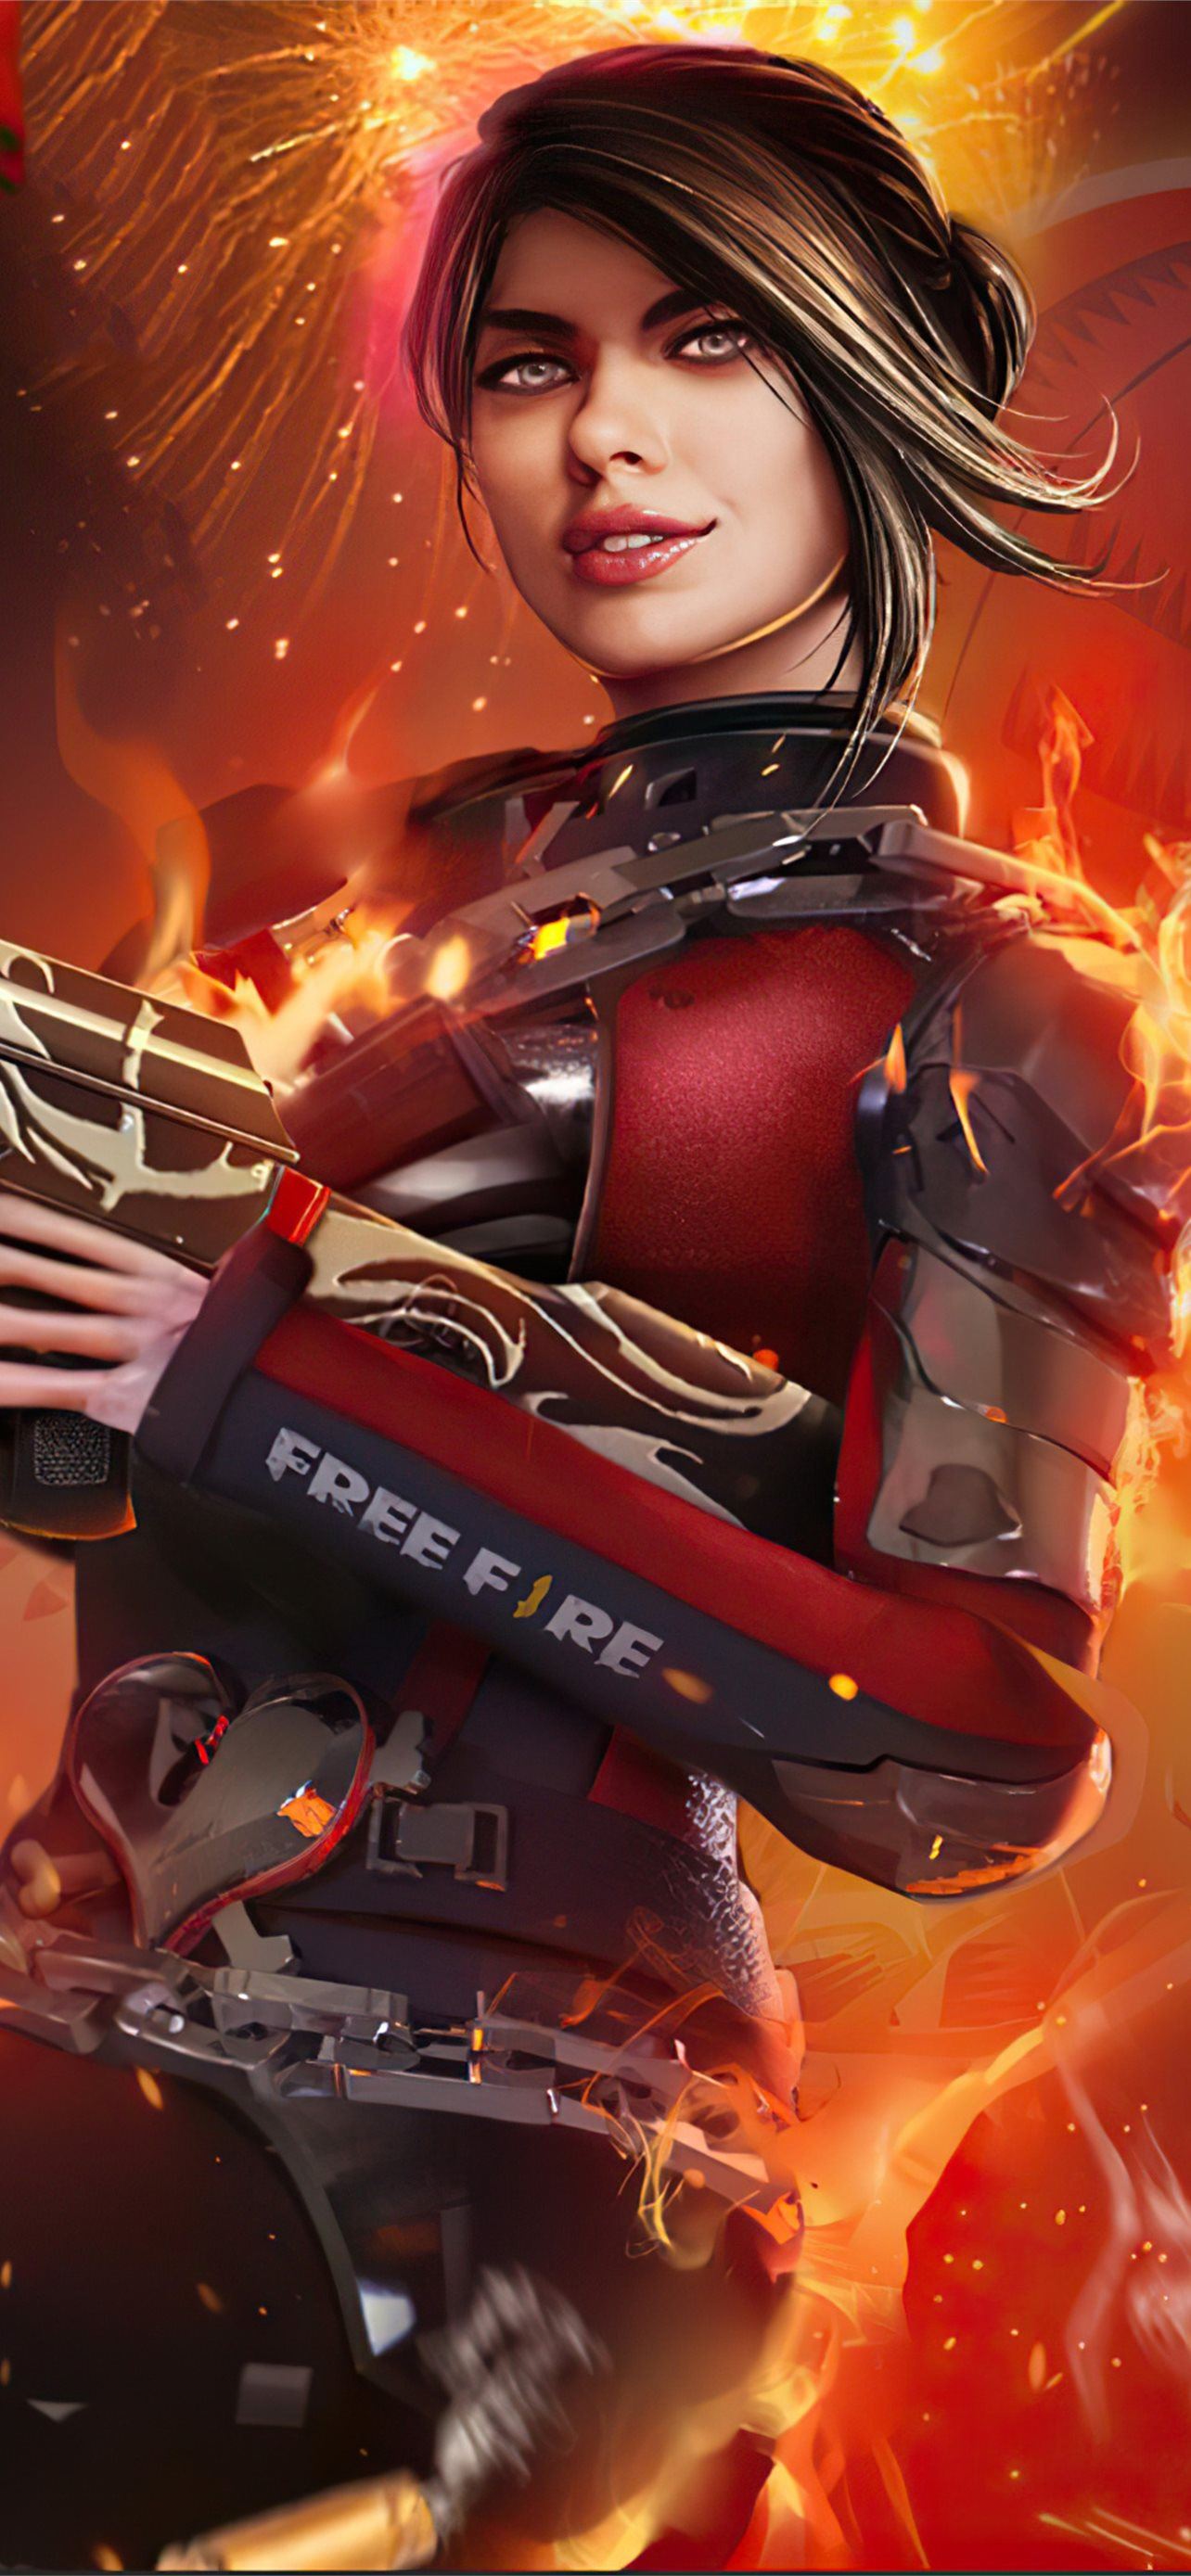 Garena Free Fire 4k Game 2020 Samsung Galaxy Note ... iPhone Wallpapers  Free Download